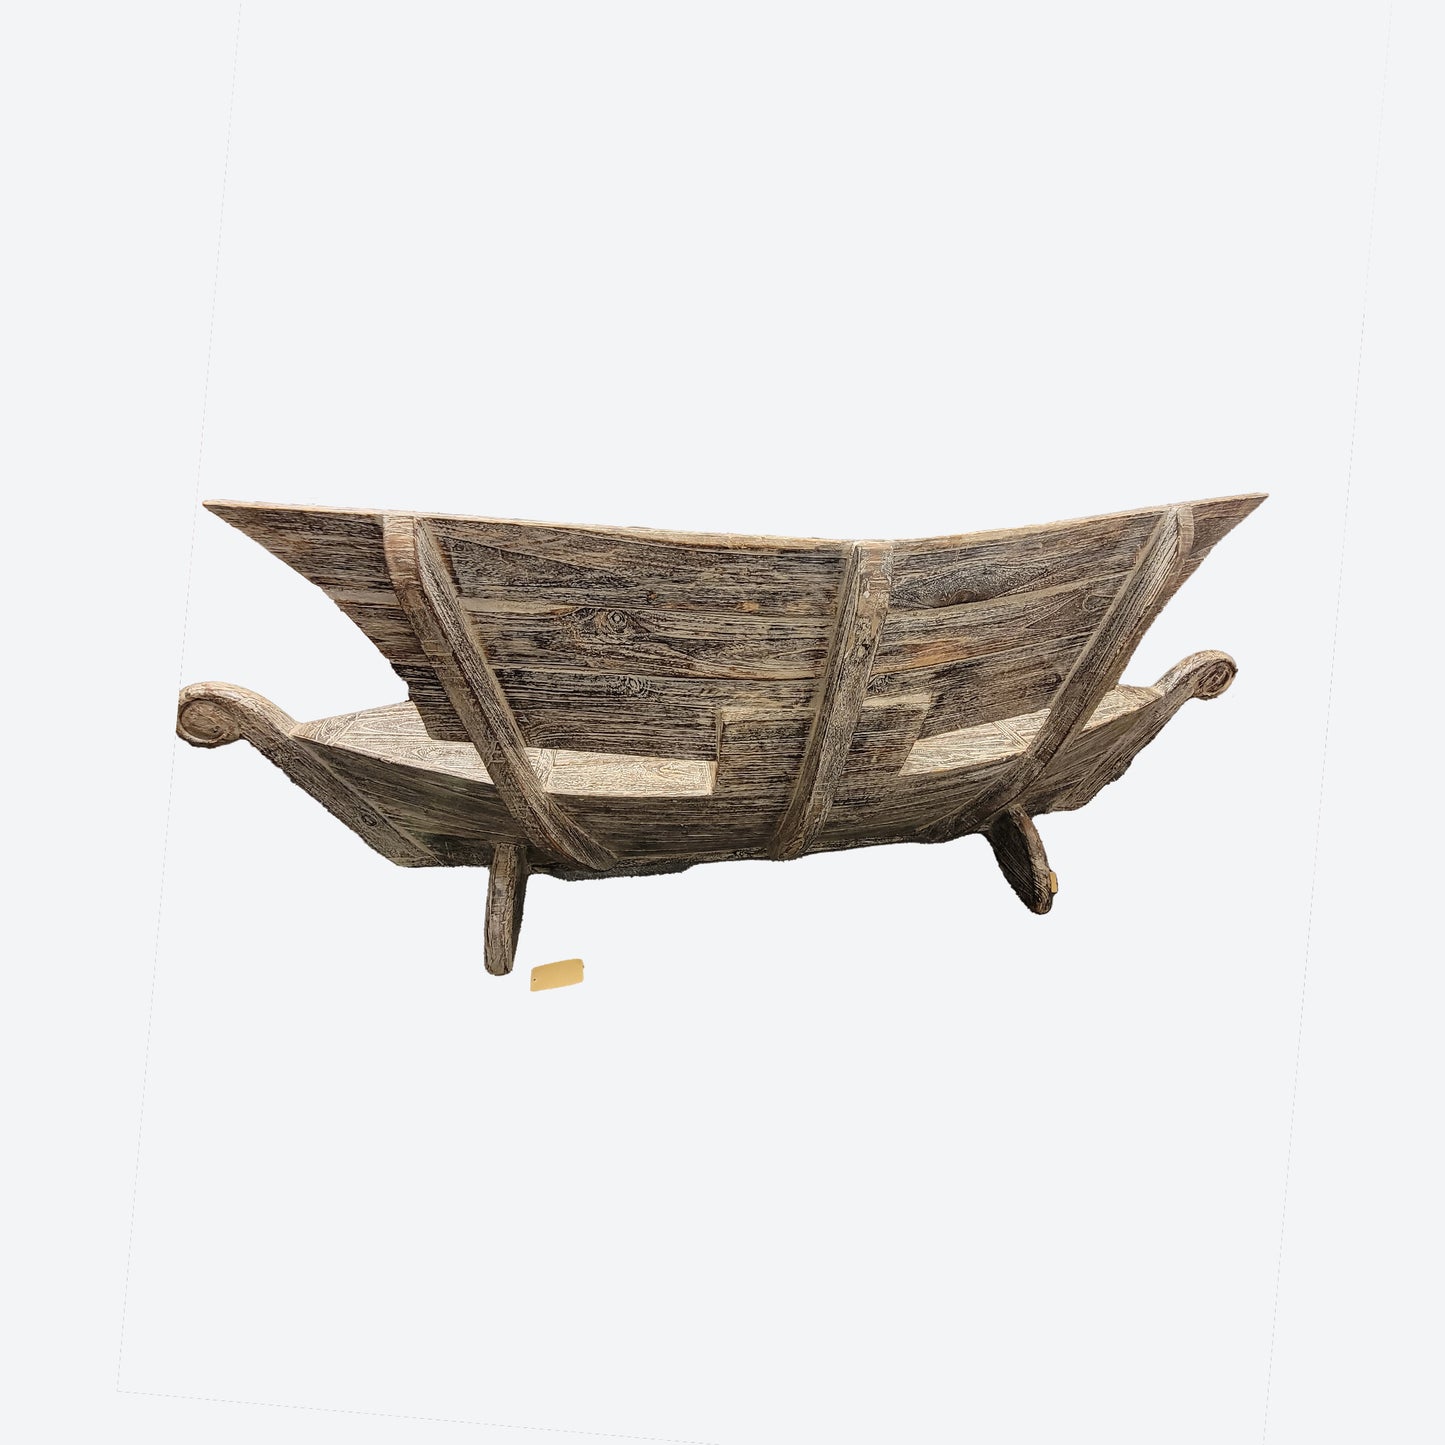 TWO SEATER OUTDOOR TEAK BOAT - SK